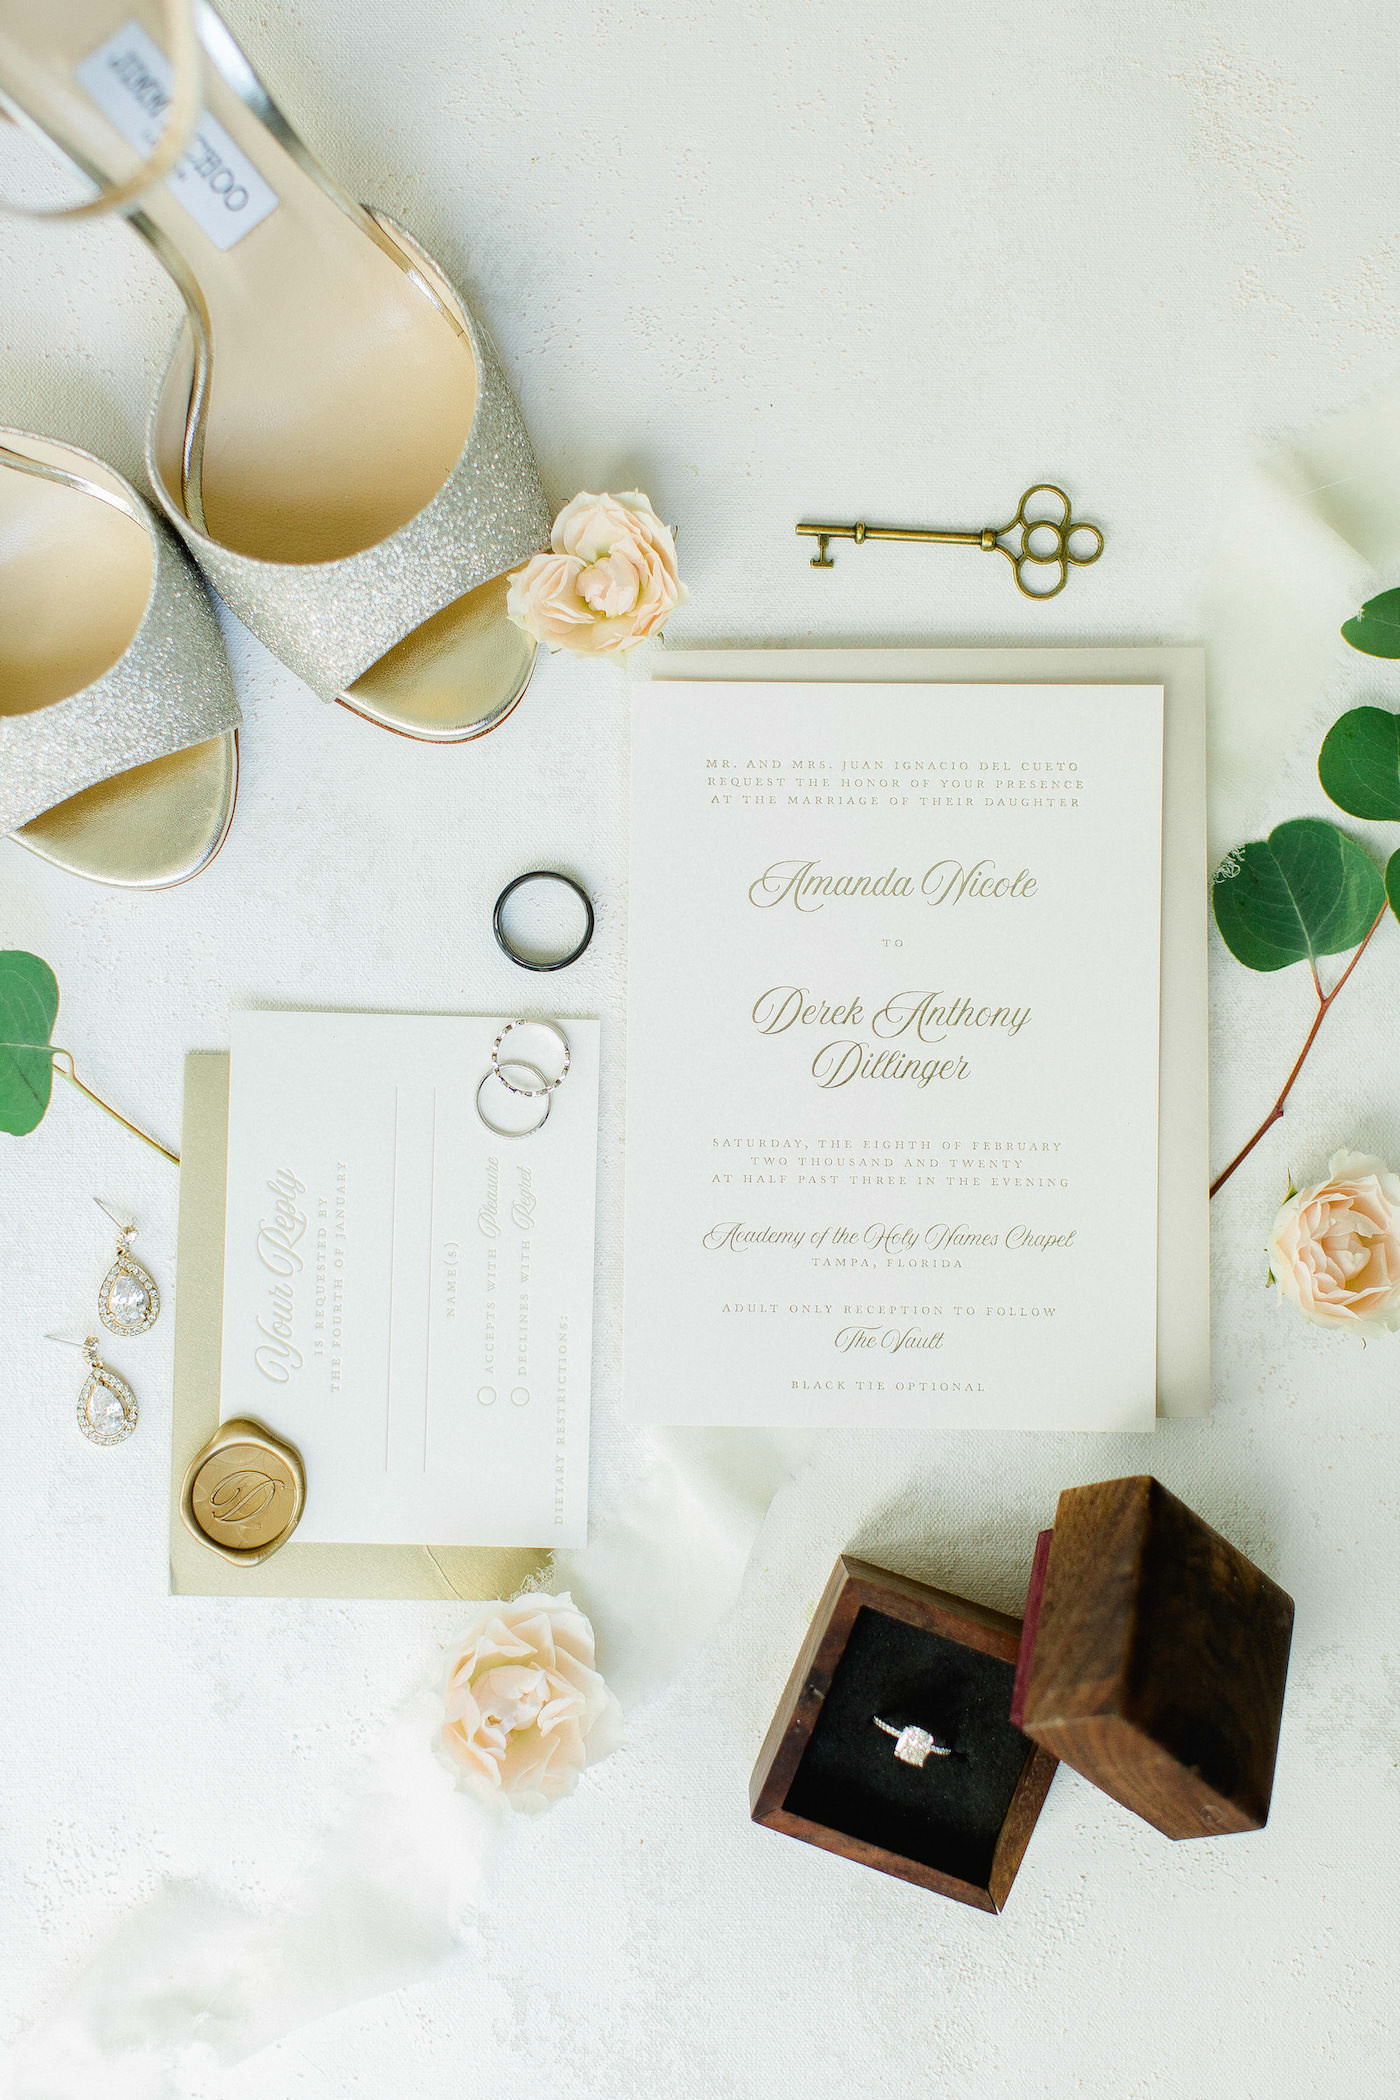 Timeless Florida Wedding Invitation Suite and Bridal Details, Wooden Ring Box, Jimmy Choo Gold Glitter Shoes, Ivory, Champagne and White Stationary | Tampa Bay Wedding Planner Breezin' Weddings